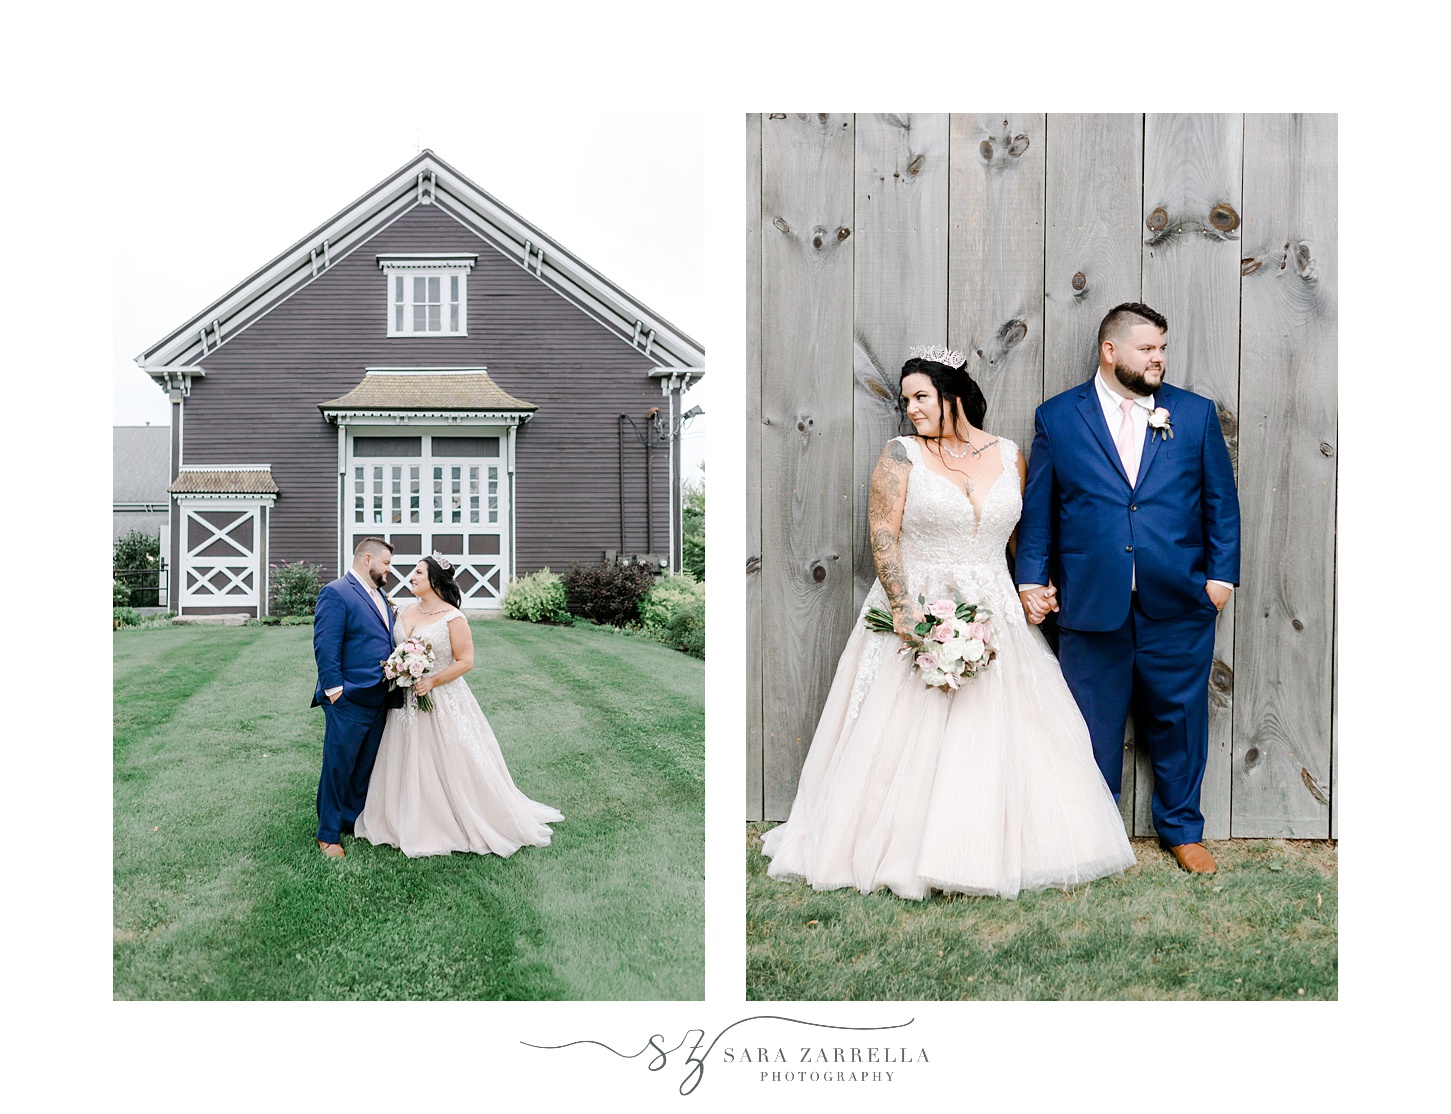 newlyweds walk on mowed lawn in front of barn at Blissful Meadows